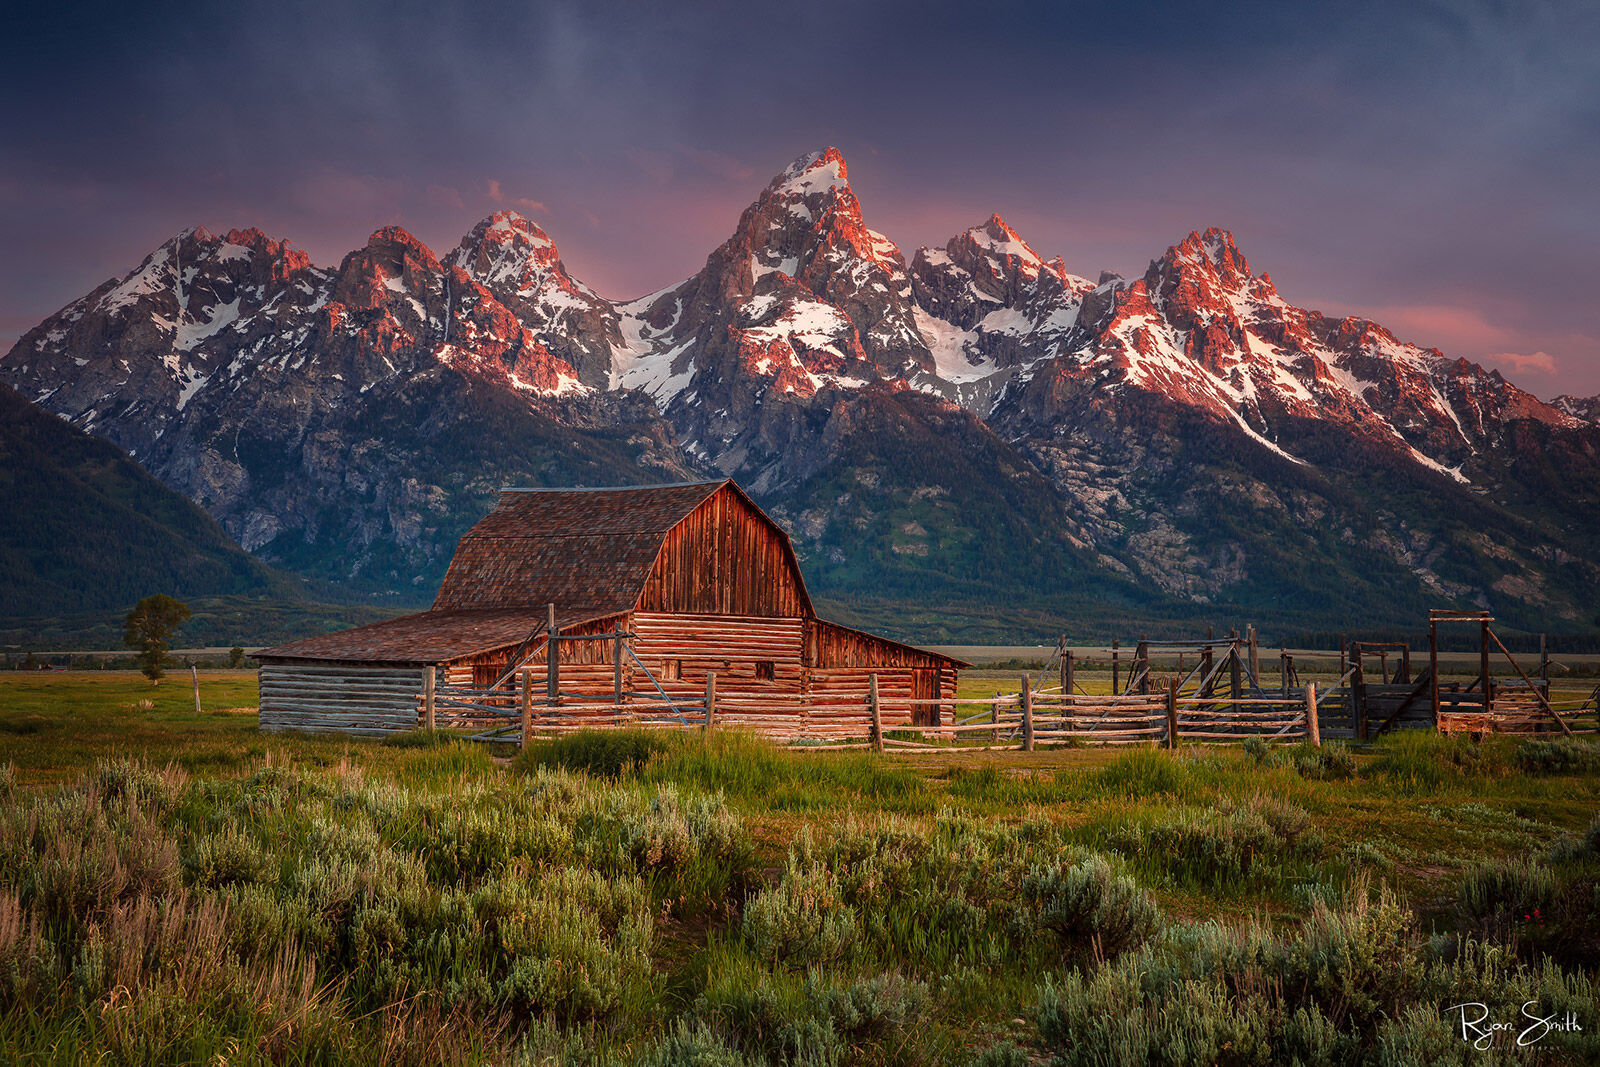 A rustic barn with a wooden fence around it sits at the foot of a grand mountain range at sunrise. Pink clouds peek from behind mountains kissed with sunlight.